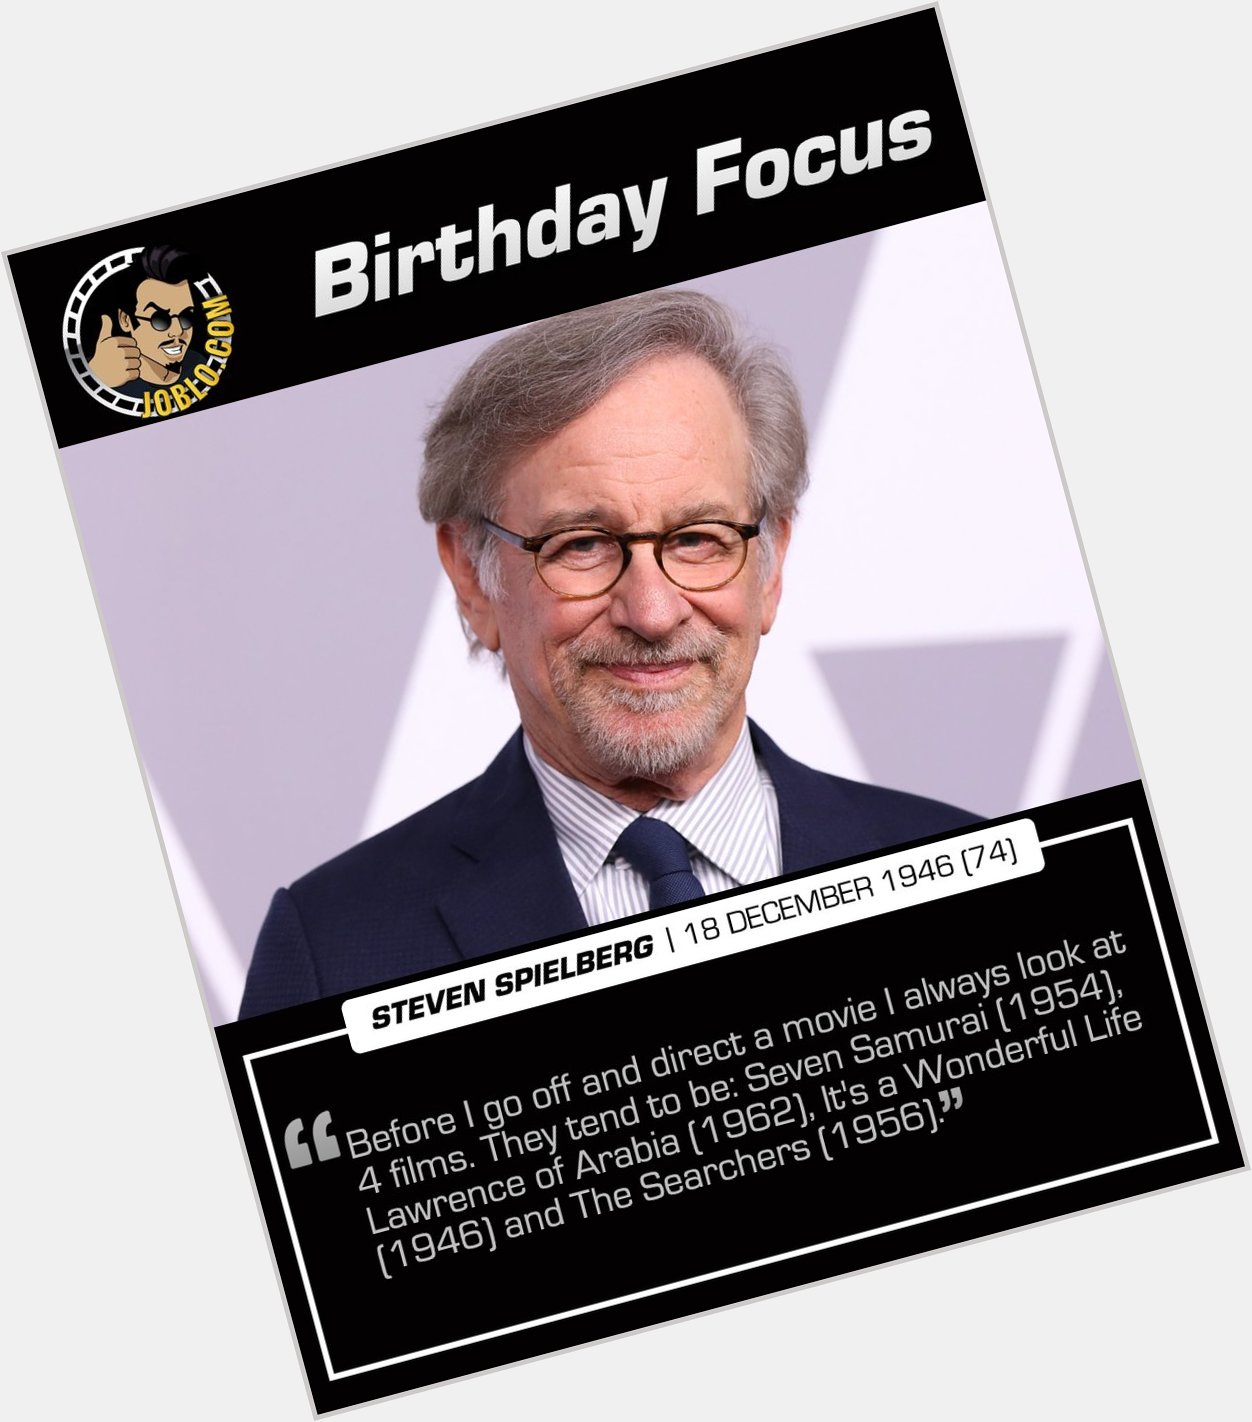 Happy 74th birthday to Steven Spielberg!

What is your favorite film of his? 